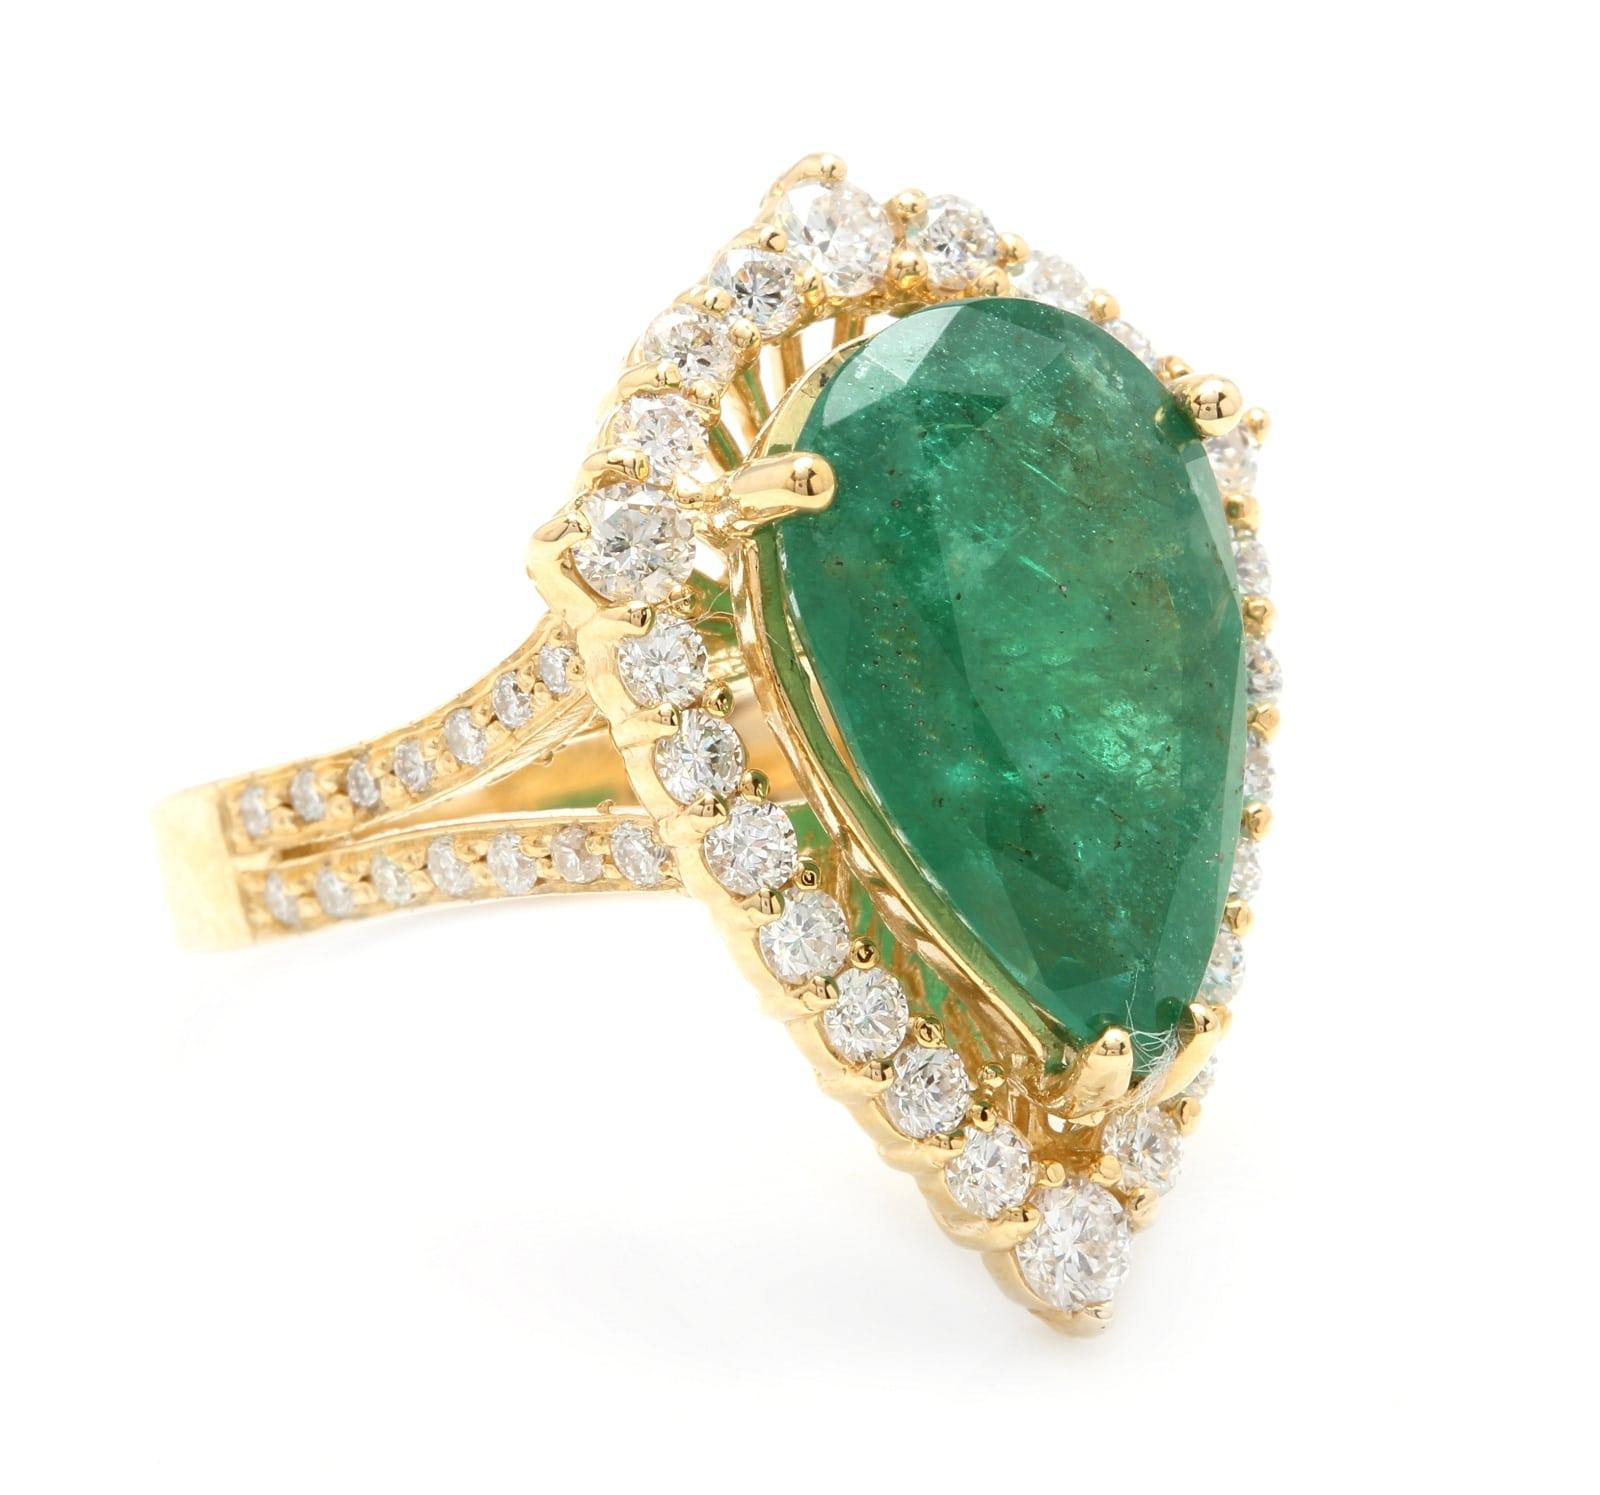 8.20 Carats Natural Emerald and Diamond 14K Solid Yellow Gold Ring

Total Natural Pear Cut Emerald Weight is: 7.00 Carats

Emerald Measures: Approx. 15.80 x 9.80mm

Head of the ring measures: Approx. 24.00 x 16.00

Natural Round Diamonds Weight: